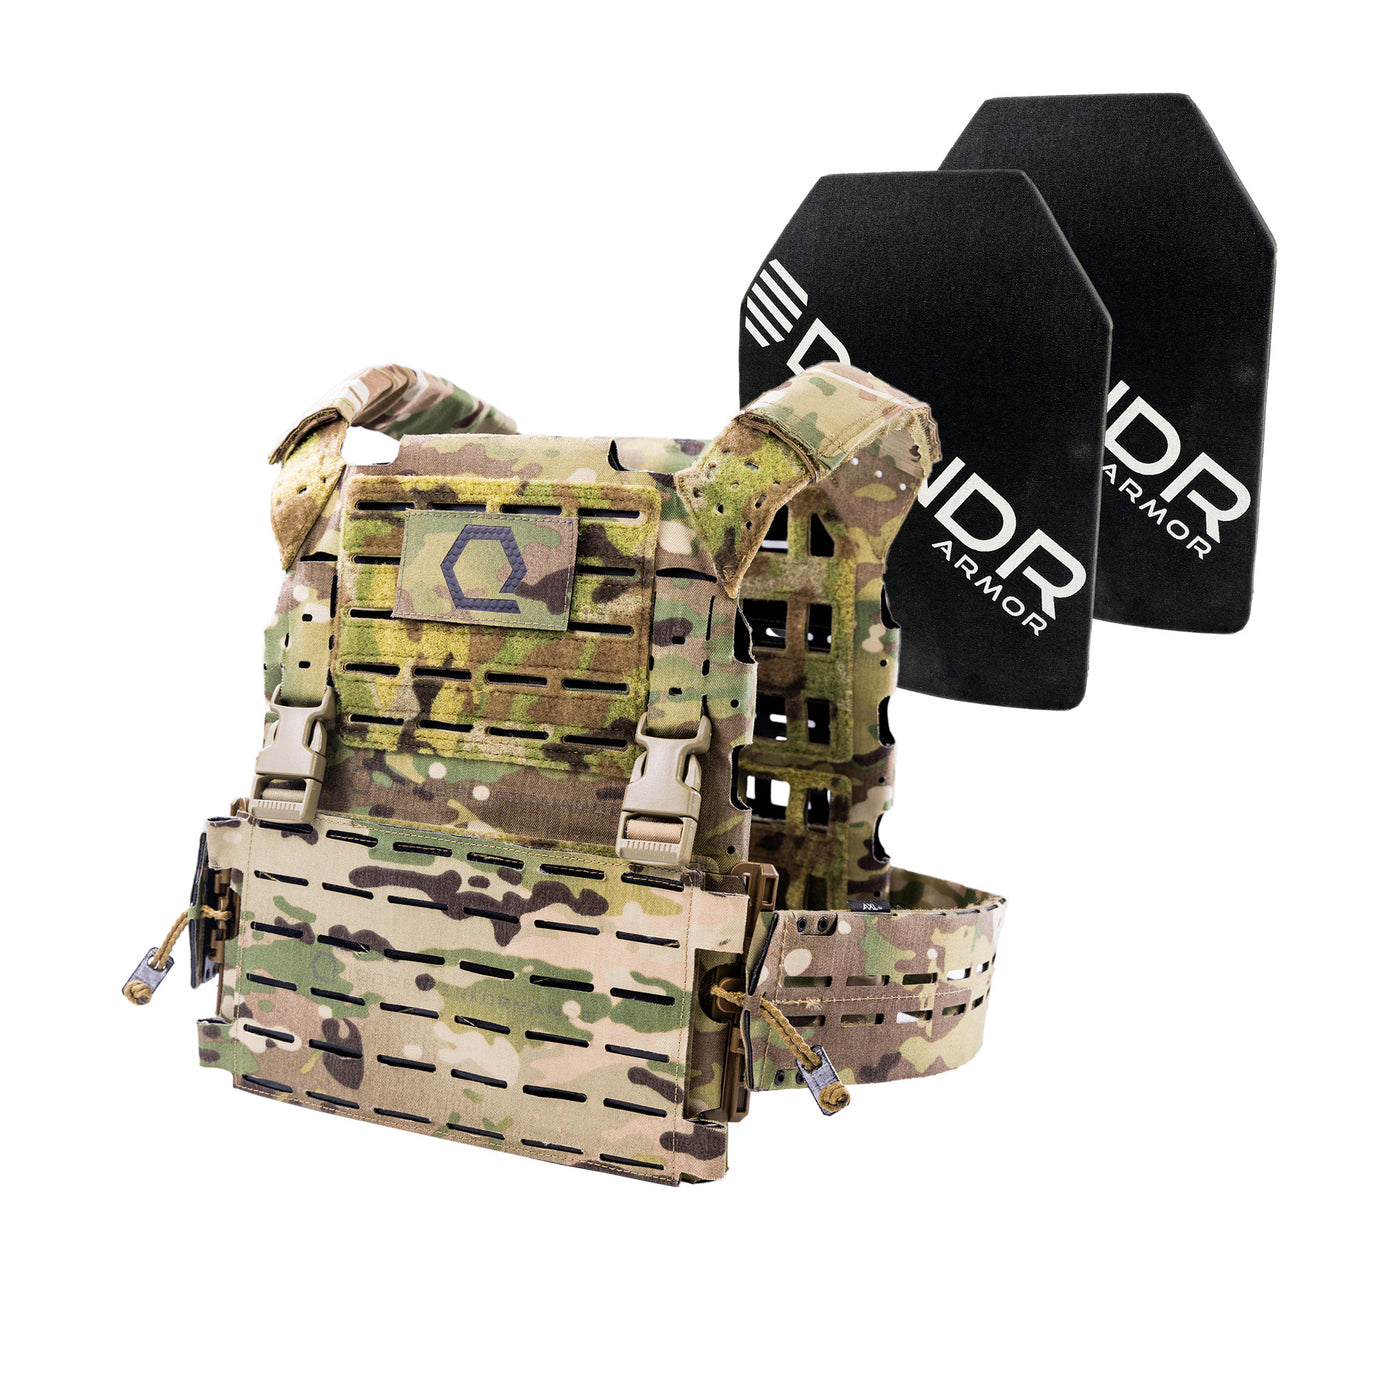 ICEPLATE EXO® DFNDR Level IV Armor Package - Launch Edition (includes 2 x DFNDR Armor Rifle Rated Hard Plates)